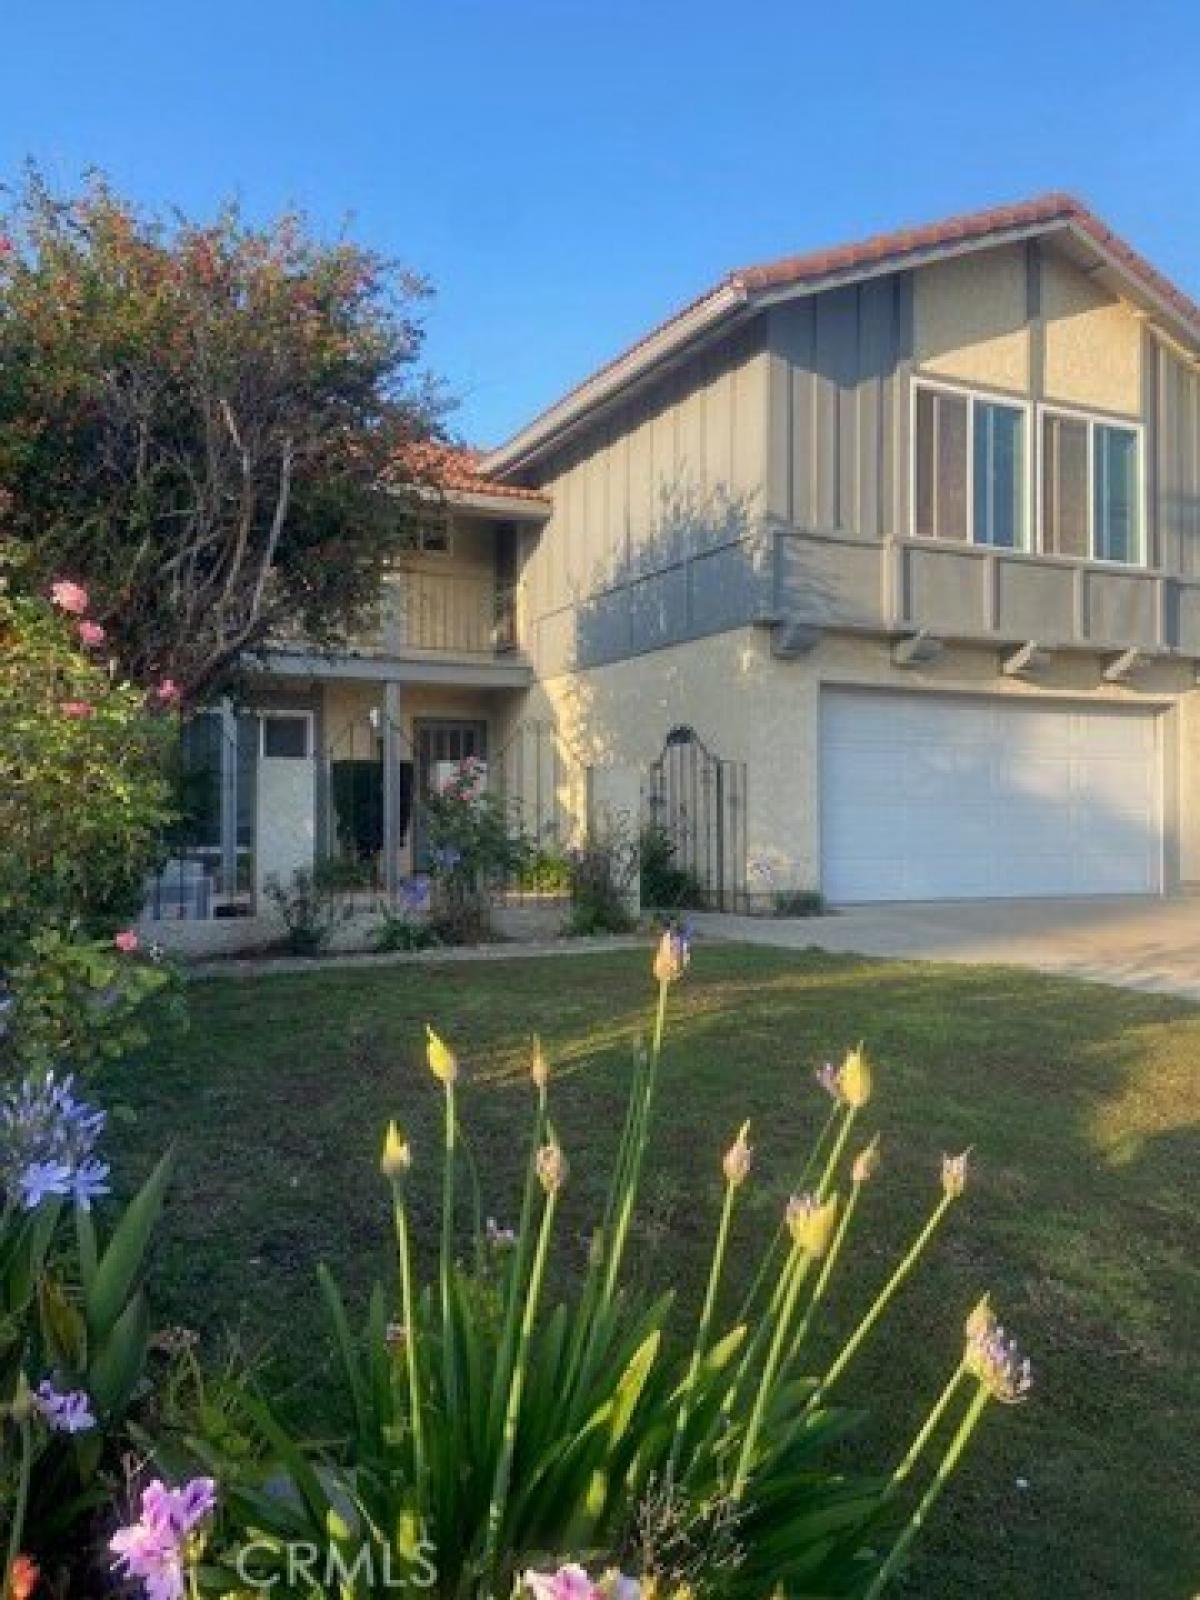 Picture of Home For Rent in Irvine, California, United States